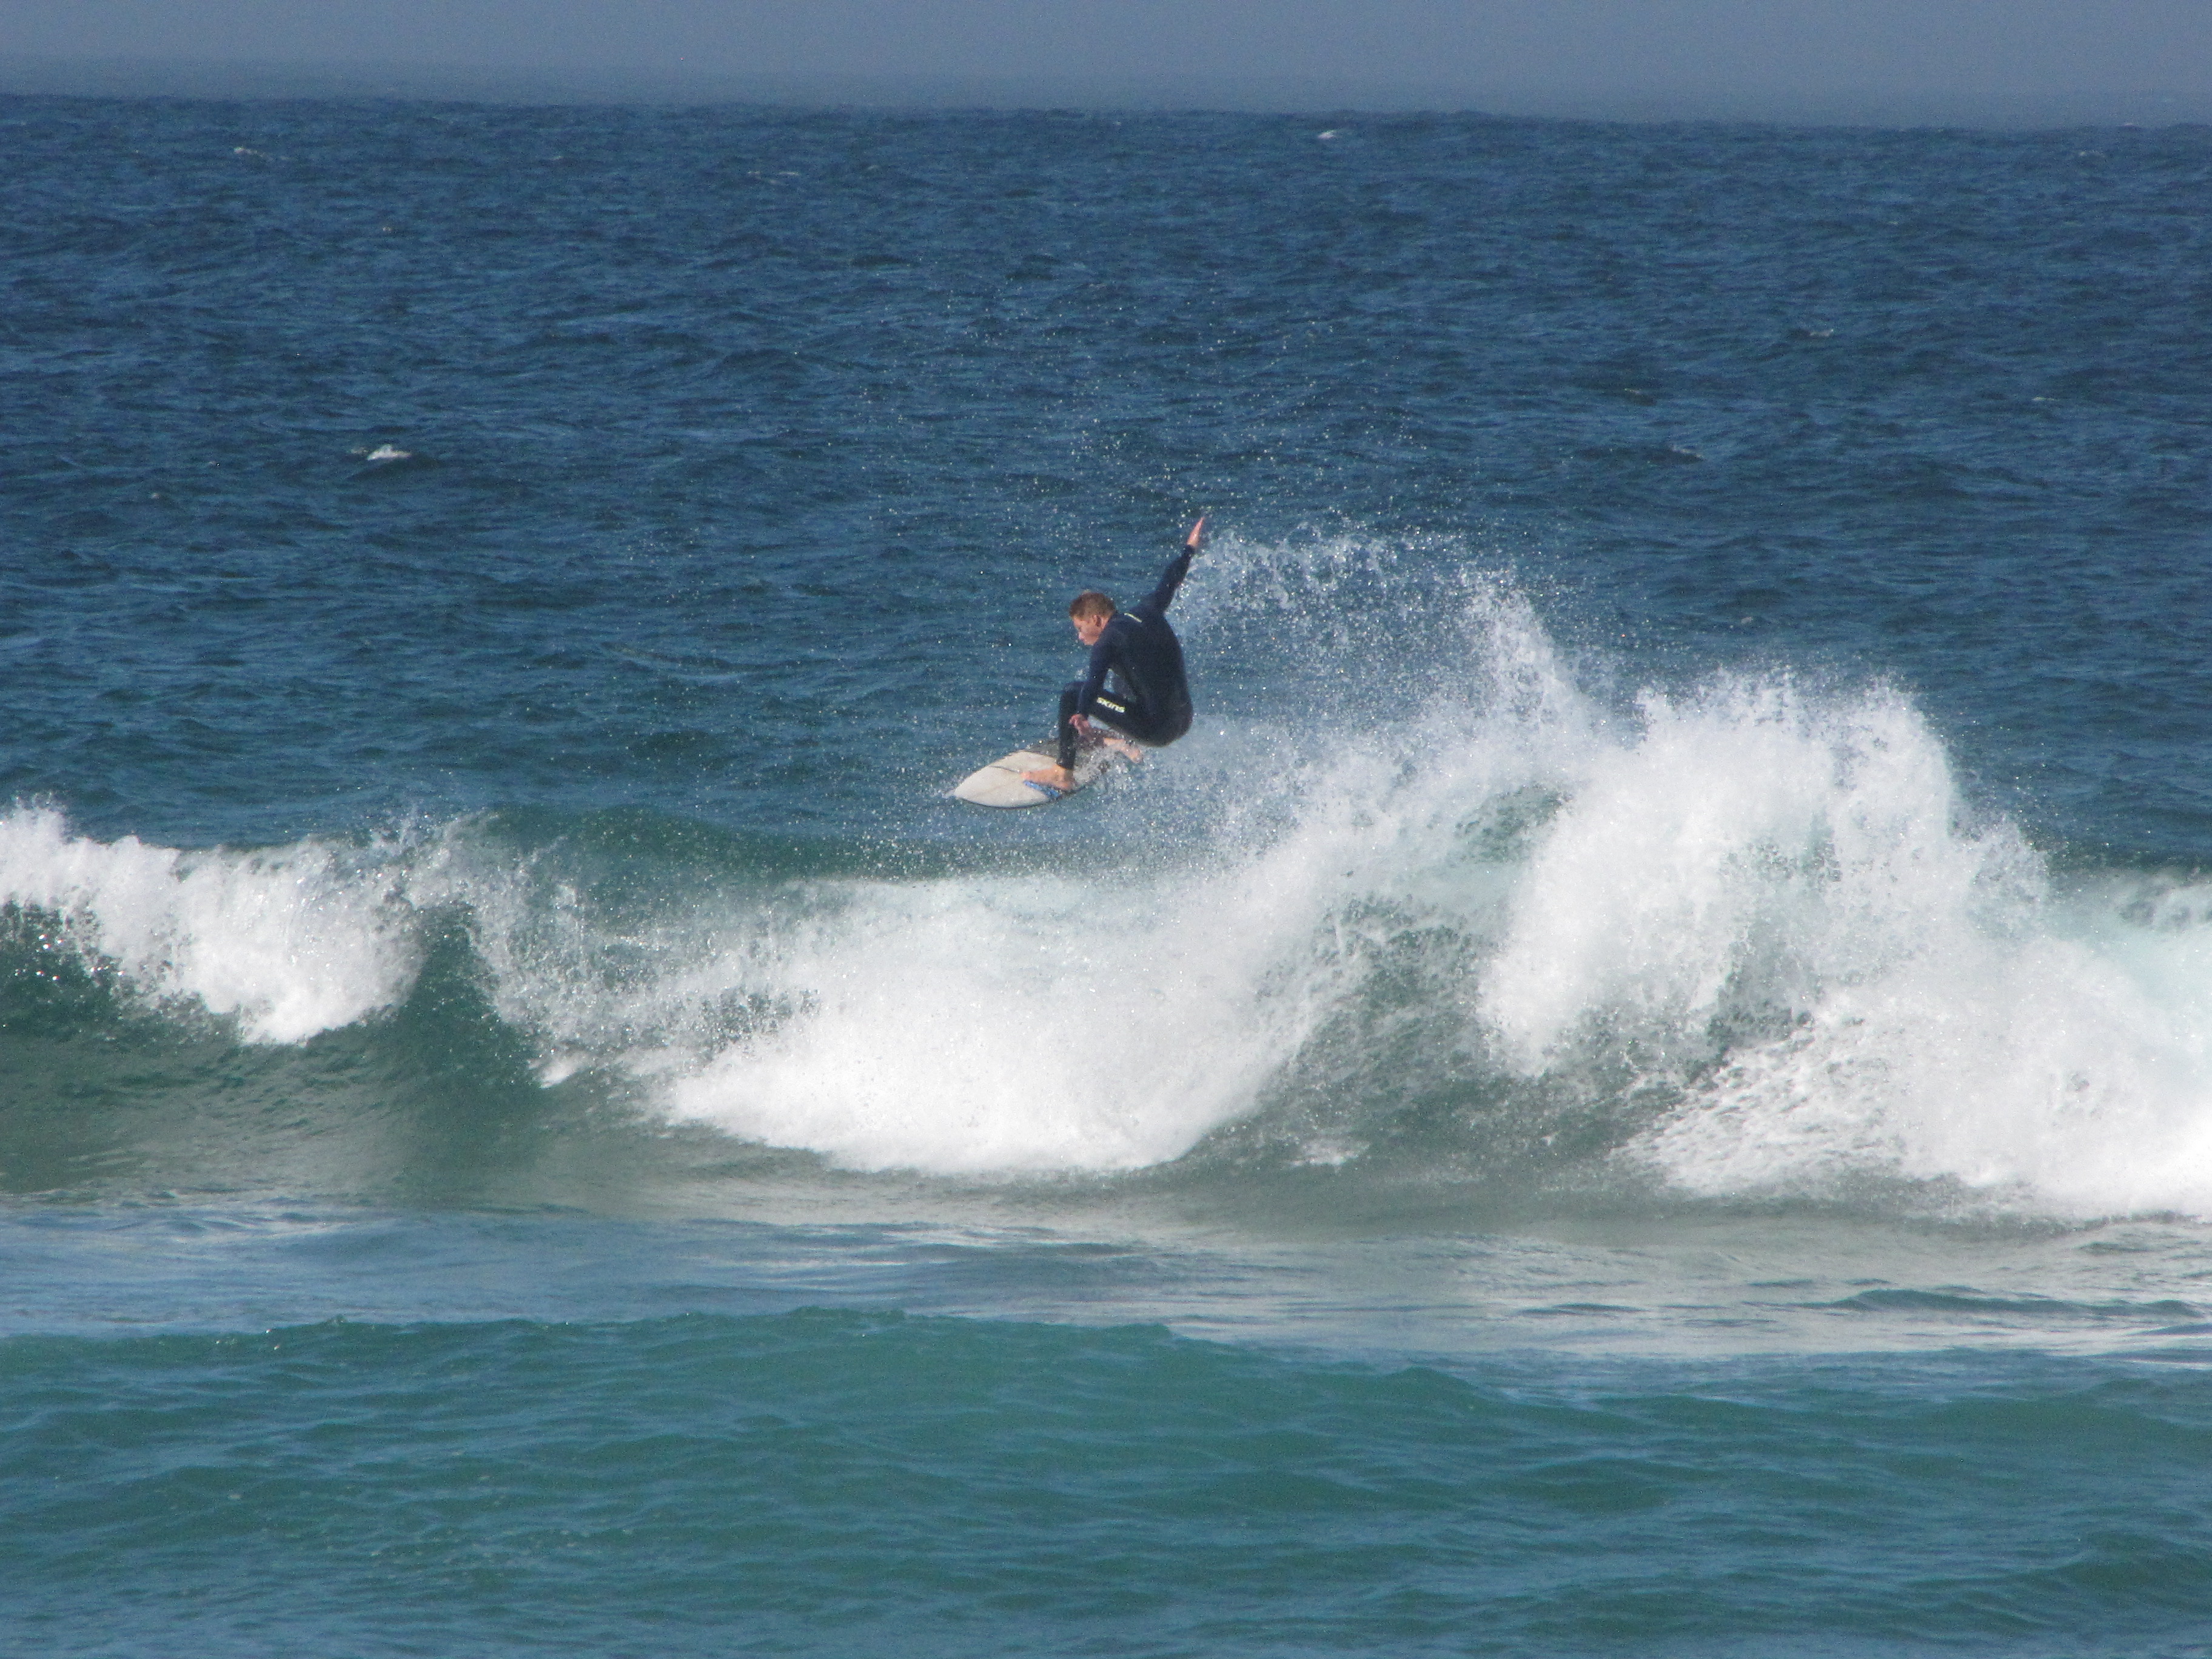 Unknown rider blasting a straight air of a nice wave at cordoama